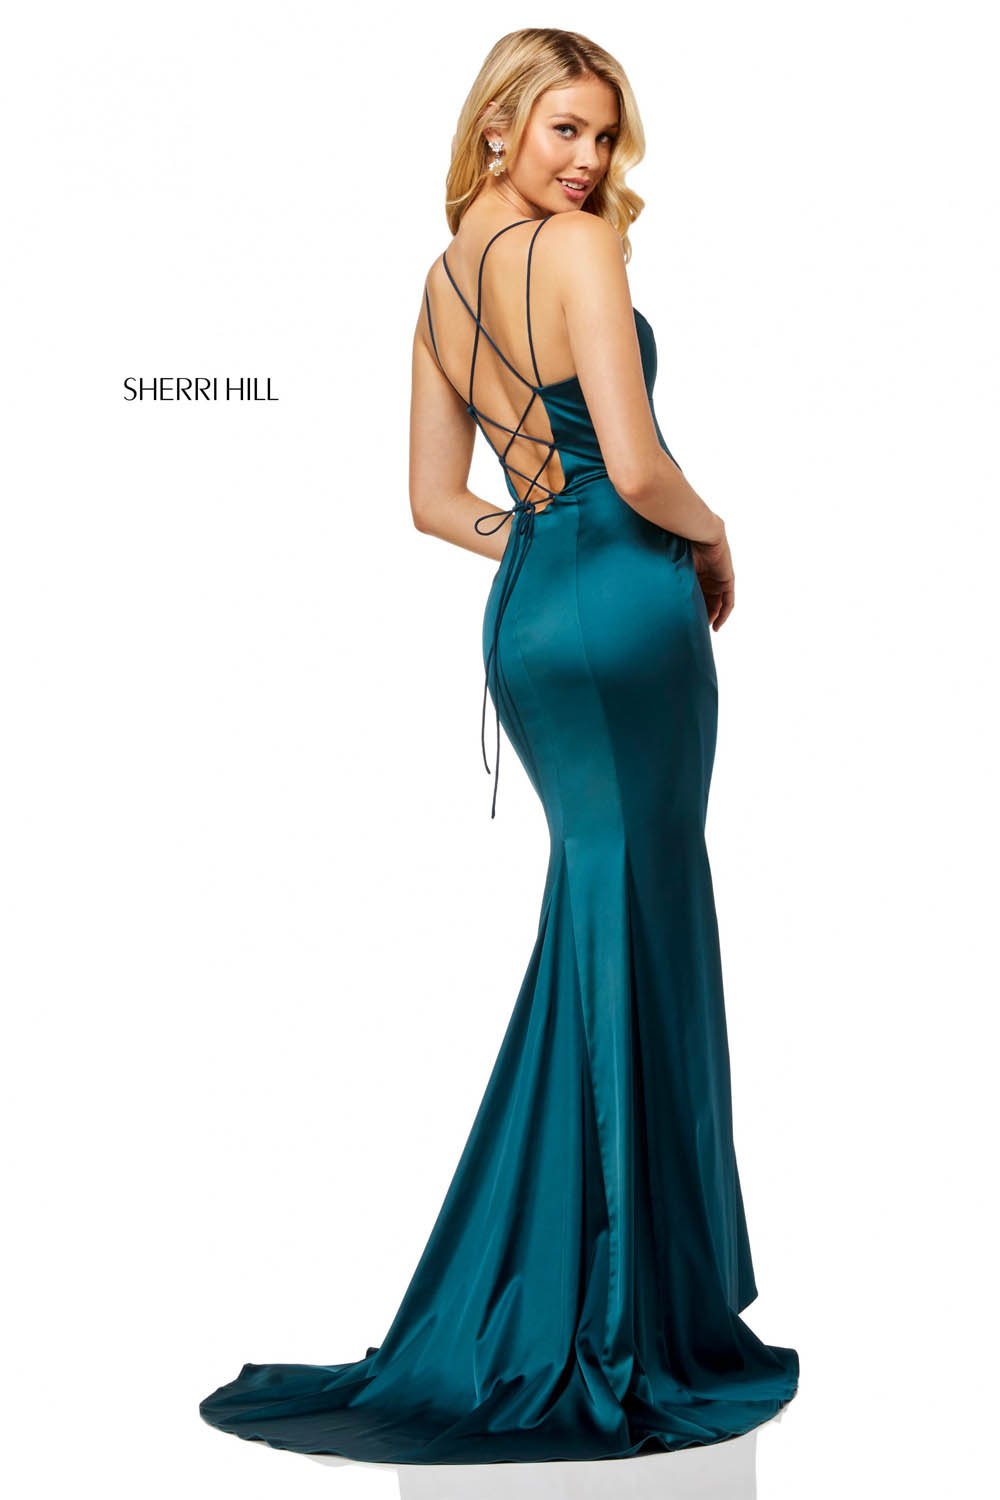 Sherri Hill 52548 dress images in these colors: Black, Red, Raspberry, Royal, Emerald, Teal, Blush, Ruby.